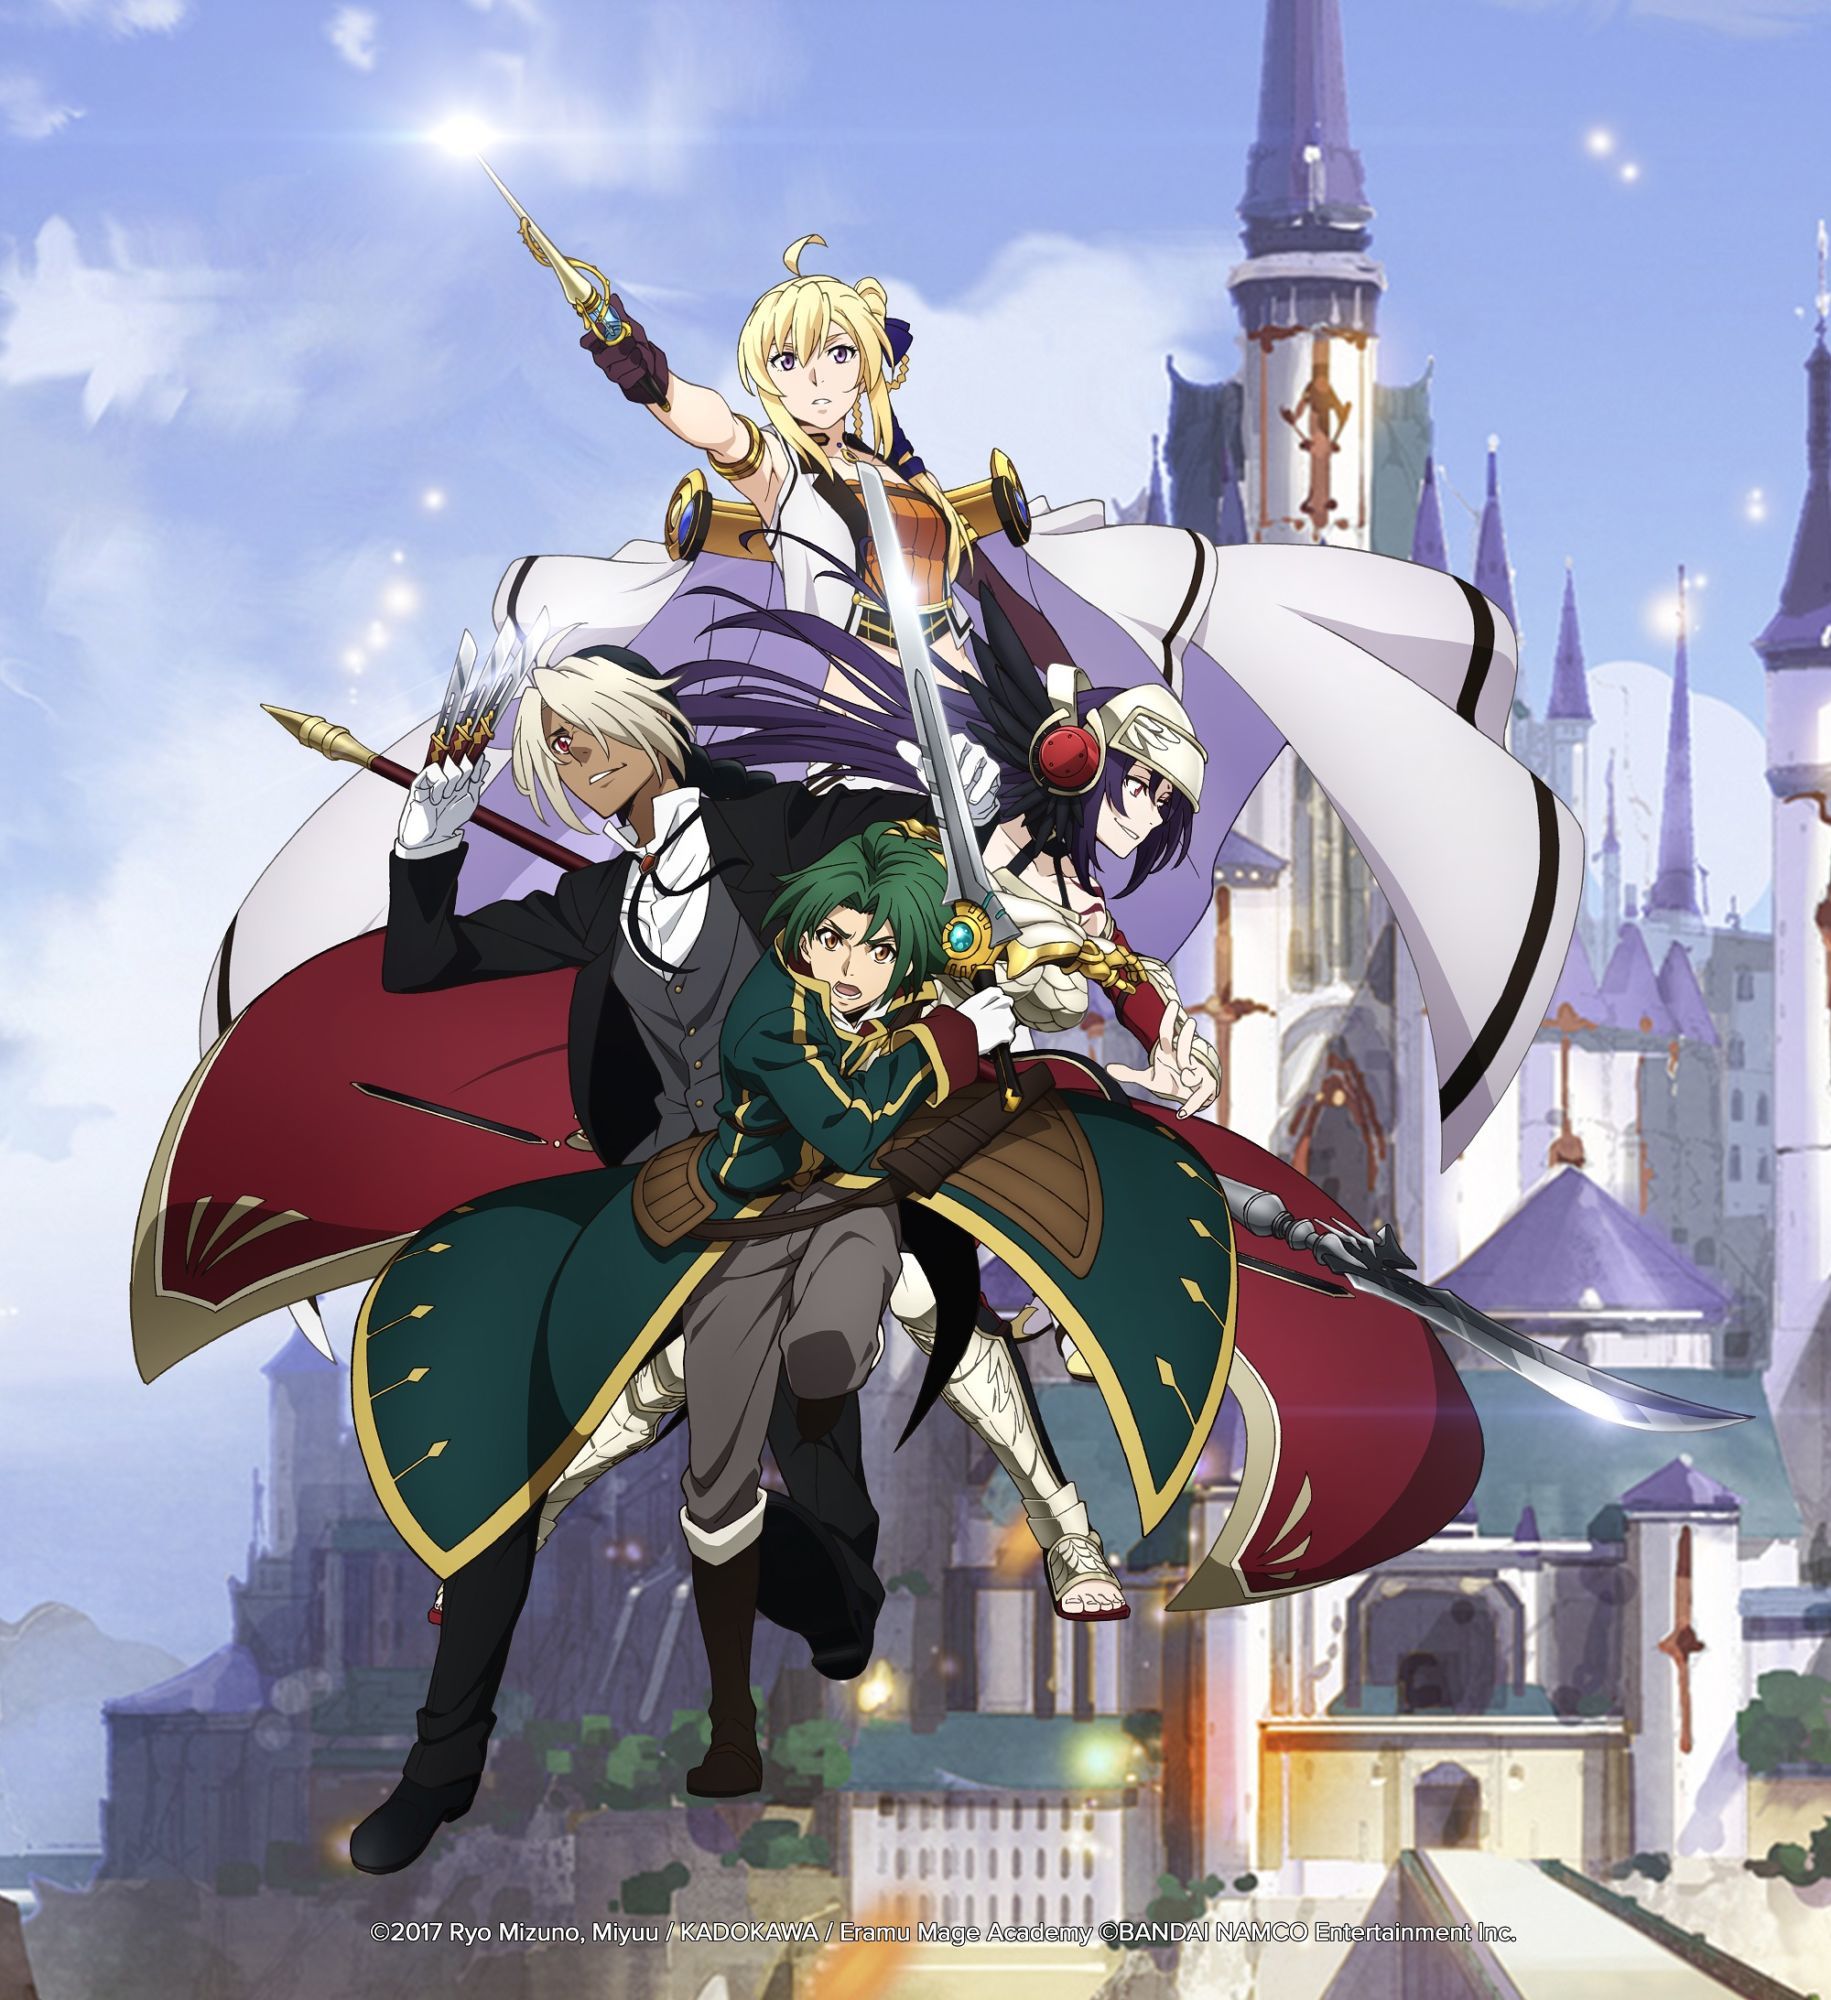 Record of Grancrest War Episode 19: A Well-Orchestrated Attack and